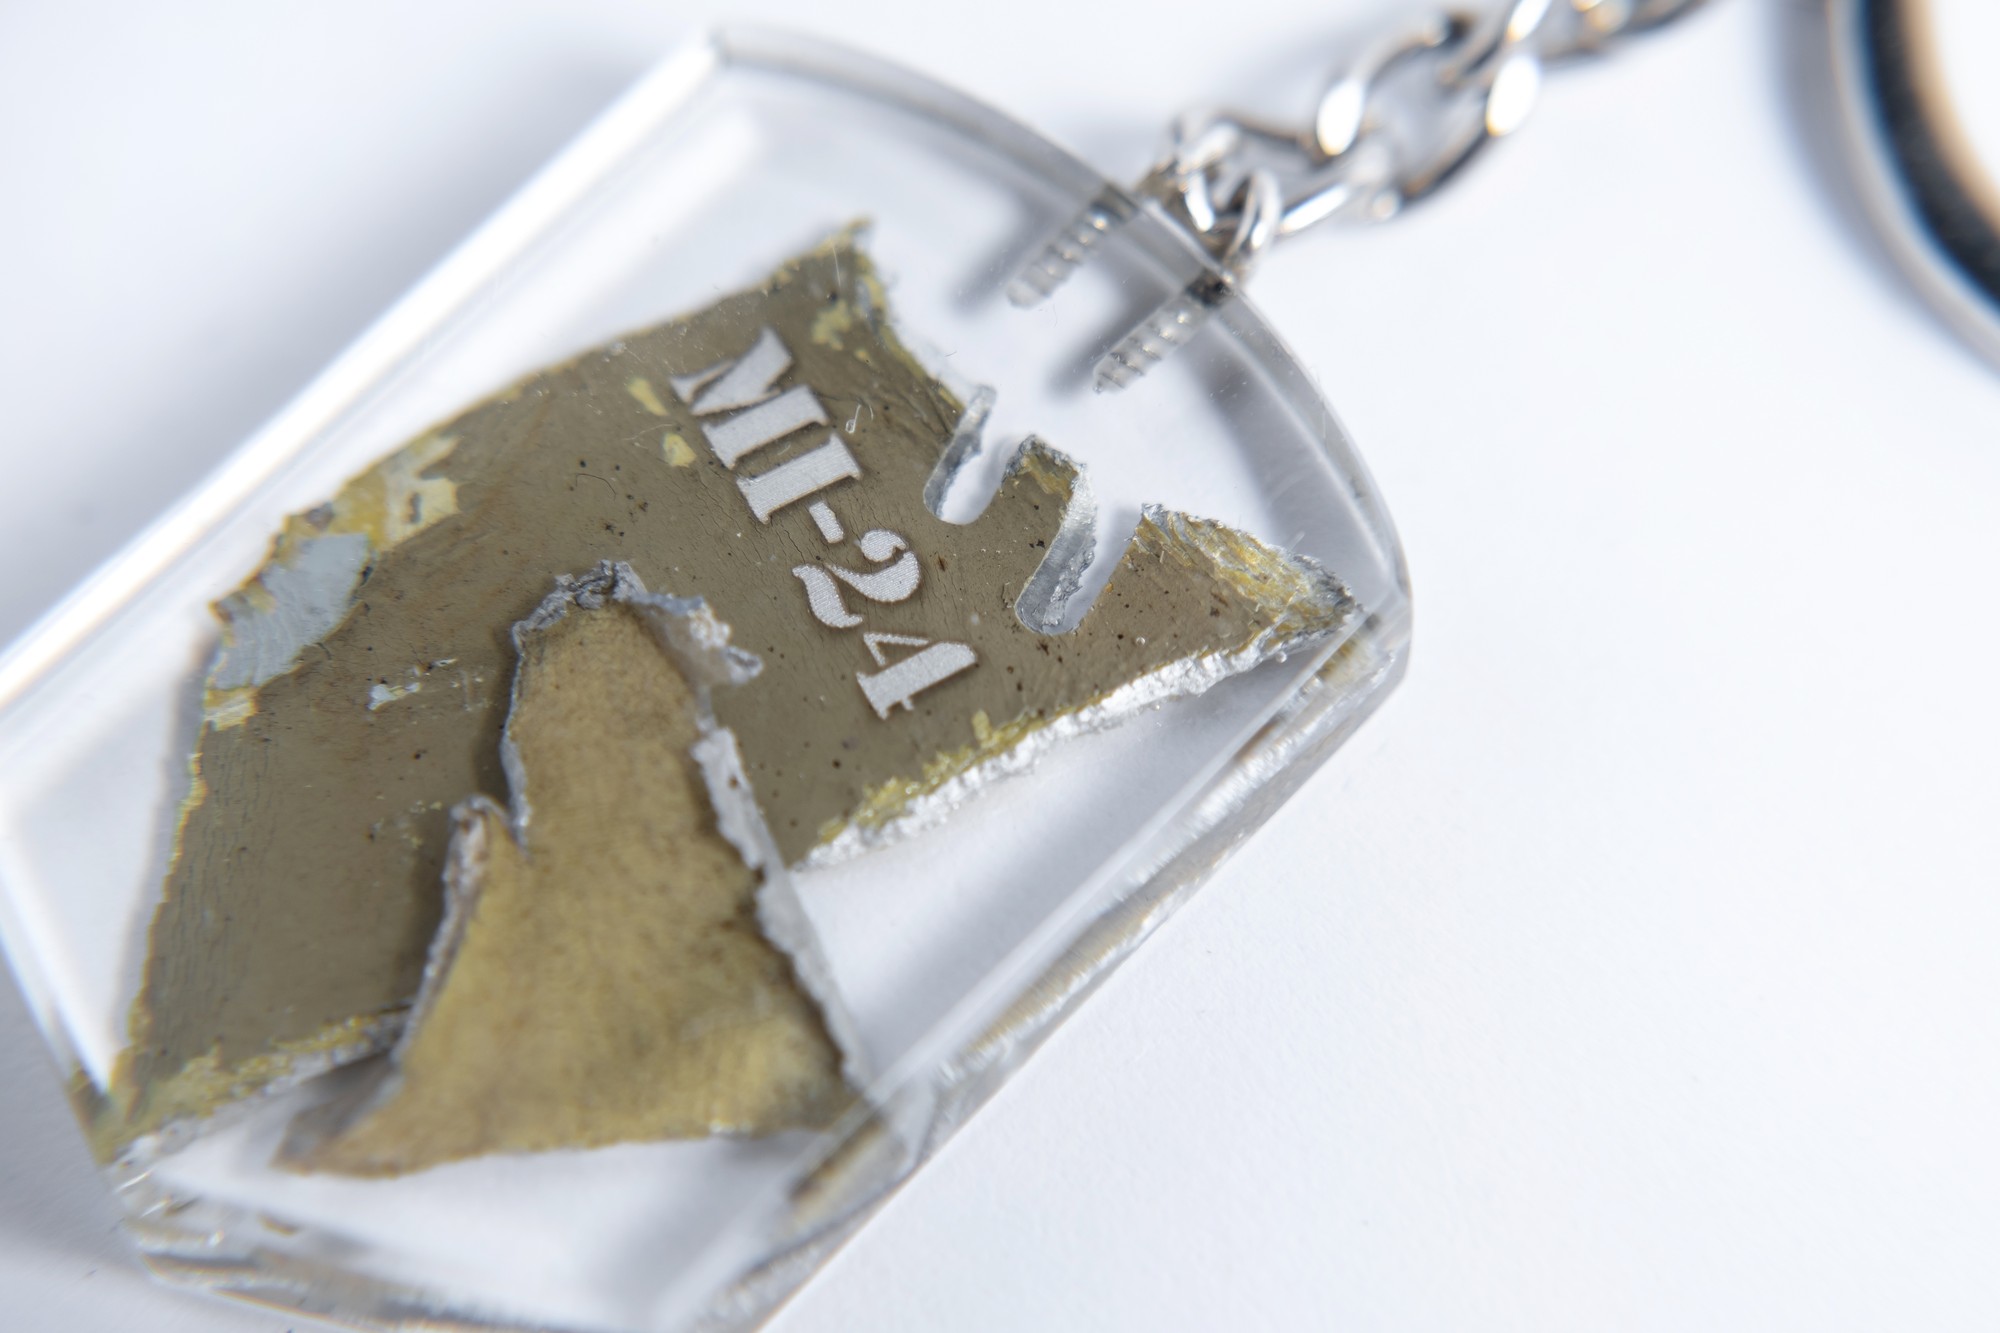 A keyring with the wreckage of a downed Russian Mi-24 helicopter